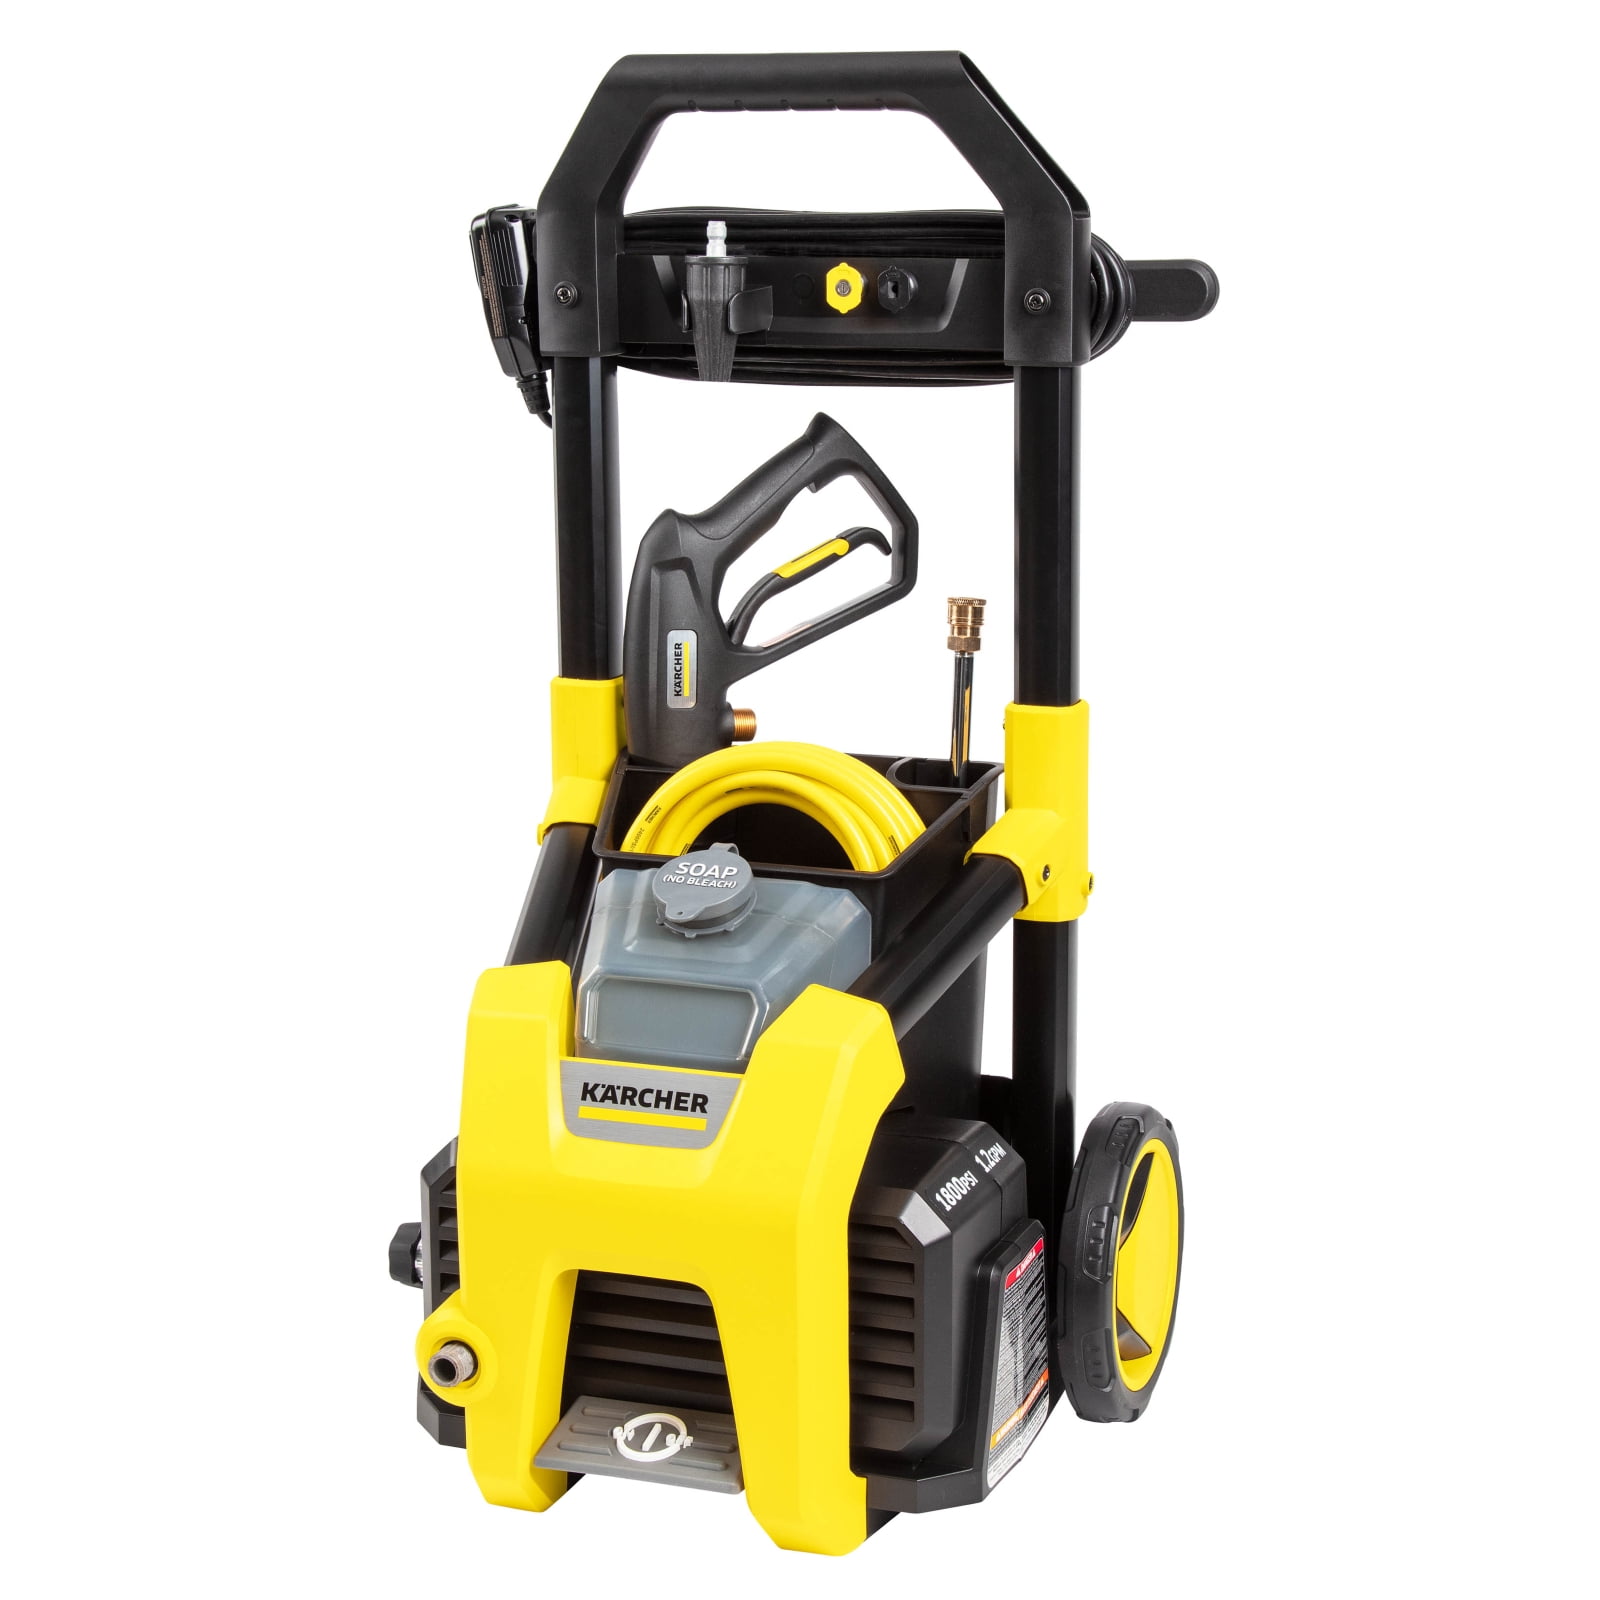 Karcher K1700 Wall Mounted Pressure Washer Solution (Obsessed